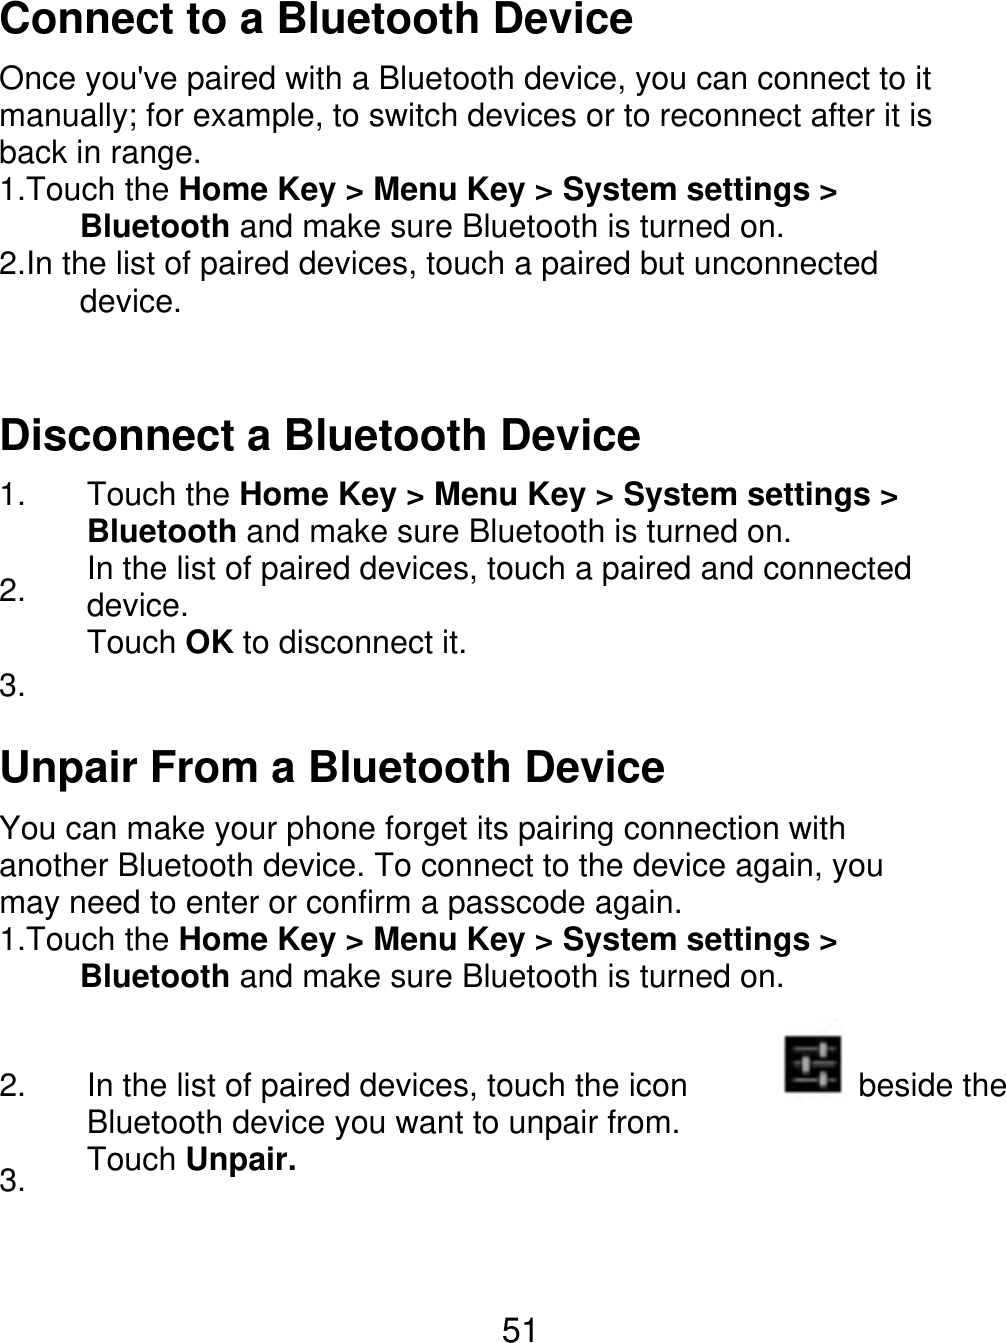 Connect to a Bluetooth Device Once you&apos;ve paired with a Bluetooth device, you can connect to it manually; for example, to switch devices or to reconnect after it is back in range. 1.Touch the Home Key &gt; Menu Key &gt; System settings &gt;      Bluetooth and make sure Bluetooth is turned on. 2.In the list of paired devices, touch a paired but unconnected      device. Disconnect a Bluetooth Device 1. 2. 3. Touch the Home Key &gt; Menu Key &gt; System settings &gt; Bluetooth and make sure Bluetooth is turned on. In the list of paired devices, touch a paired and connected device. Touch OK to disconnect it. Unpair From a Bluetooth Device You can make your phone forget its pairing connection with another Bluetooth device. To connect to the device again, you may need to enter or confirm a passcode again. 1.Touch the Home Key &gt; Menu Key &gt; System settings &gt;      Bluetooth and make sure Bluetooth is turned on. 2. 3. In the list of paired devices, touch the icon Bluetooth device you want to unpair from. Touch Unpair. beside the 51 